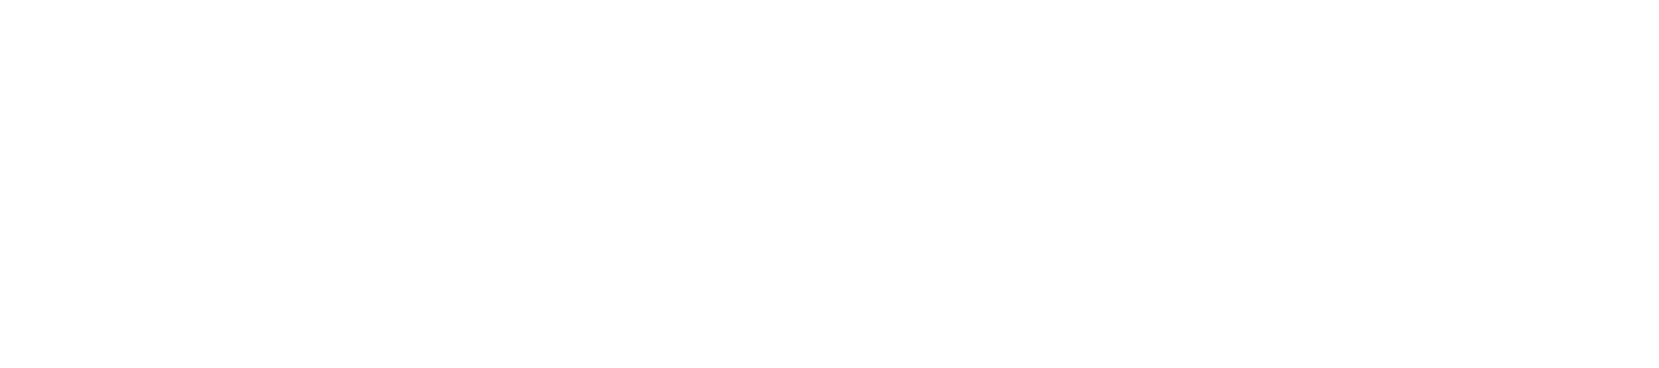 Romeo Power logo large for dark backgrounds (transparent PNG)